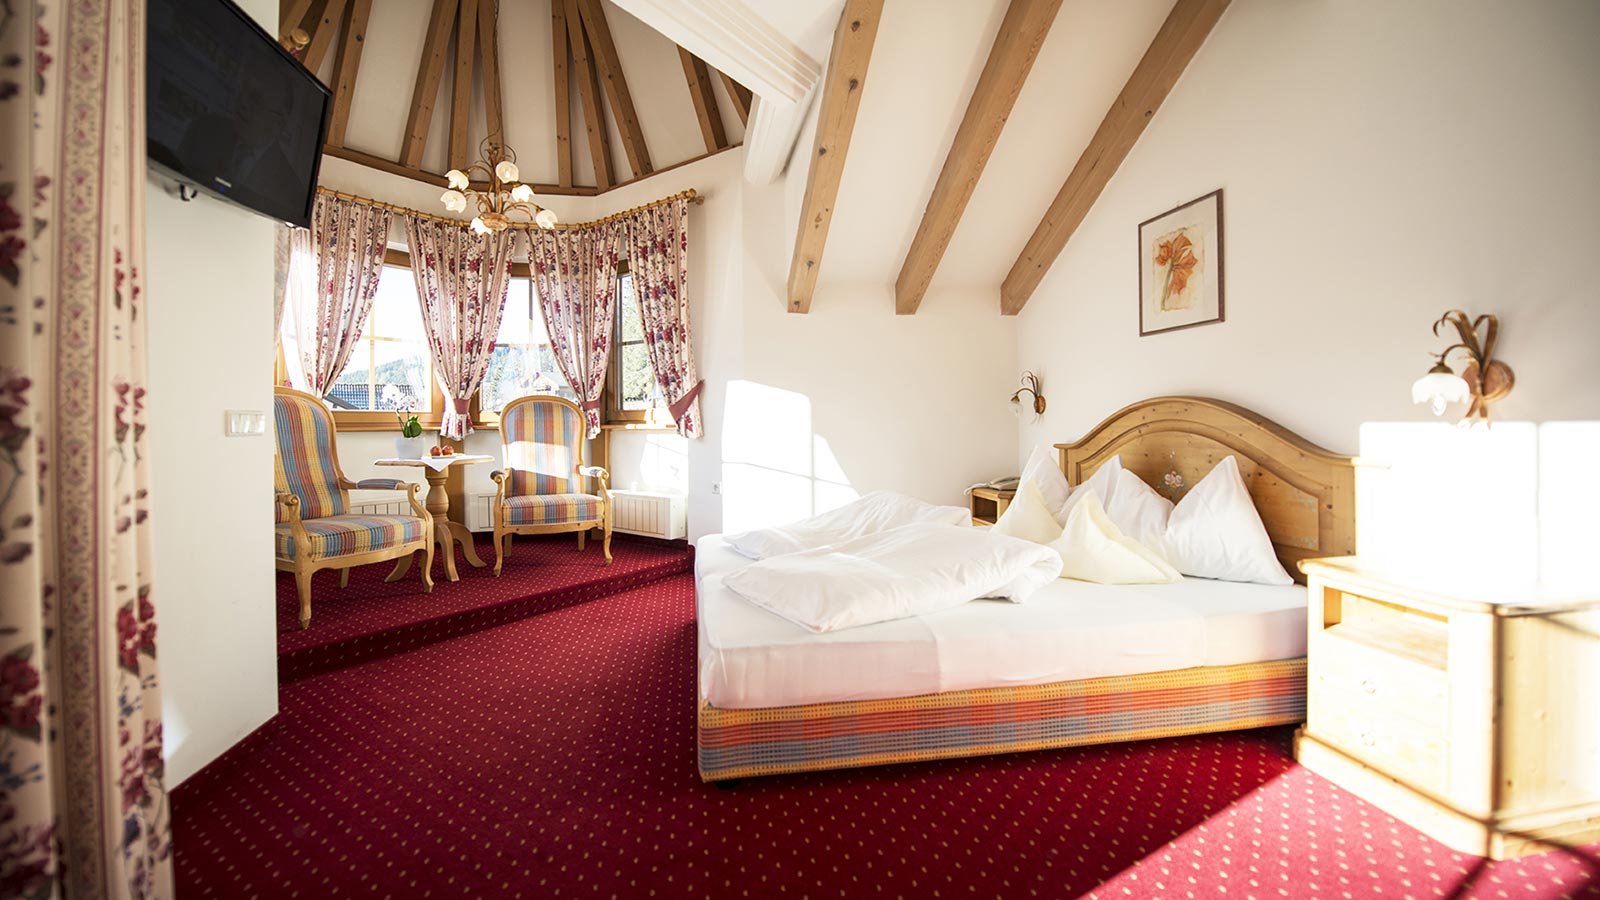 Refined and spacious room at the Hotel Gschwendt with red carpeting, double bed and large windows